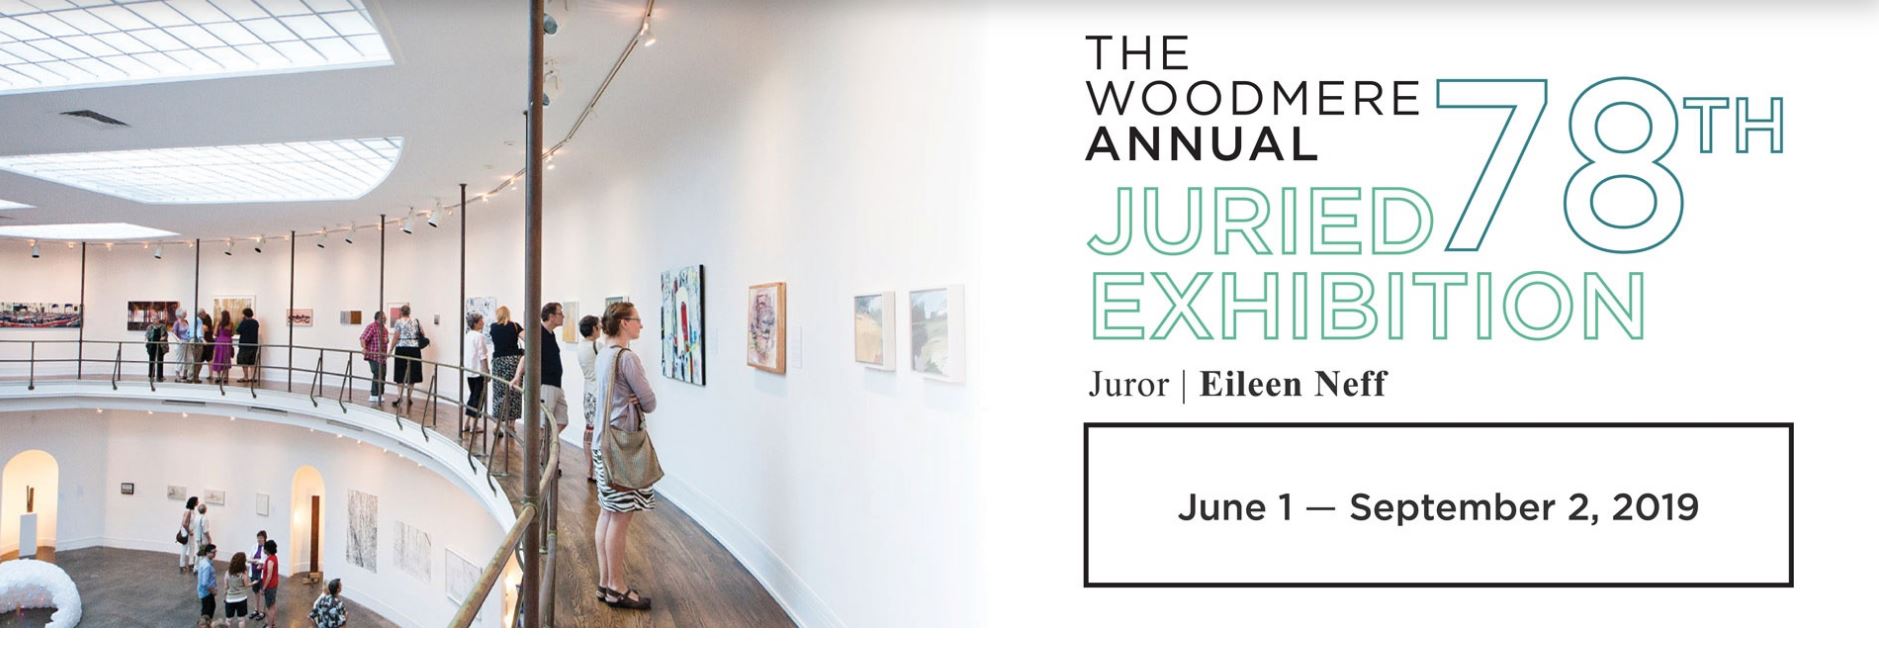 Woodmere's 78th Annual Juried Exhibition Open House